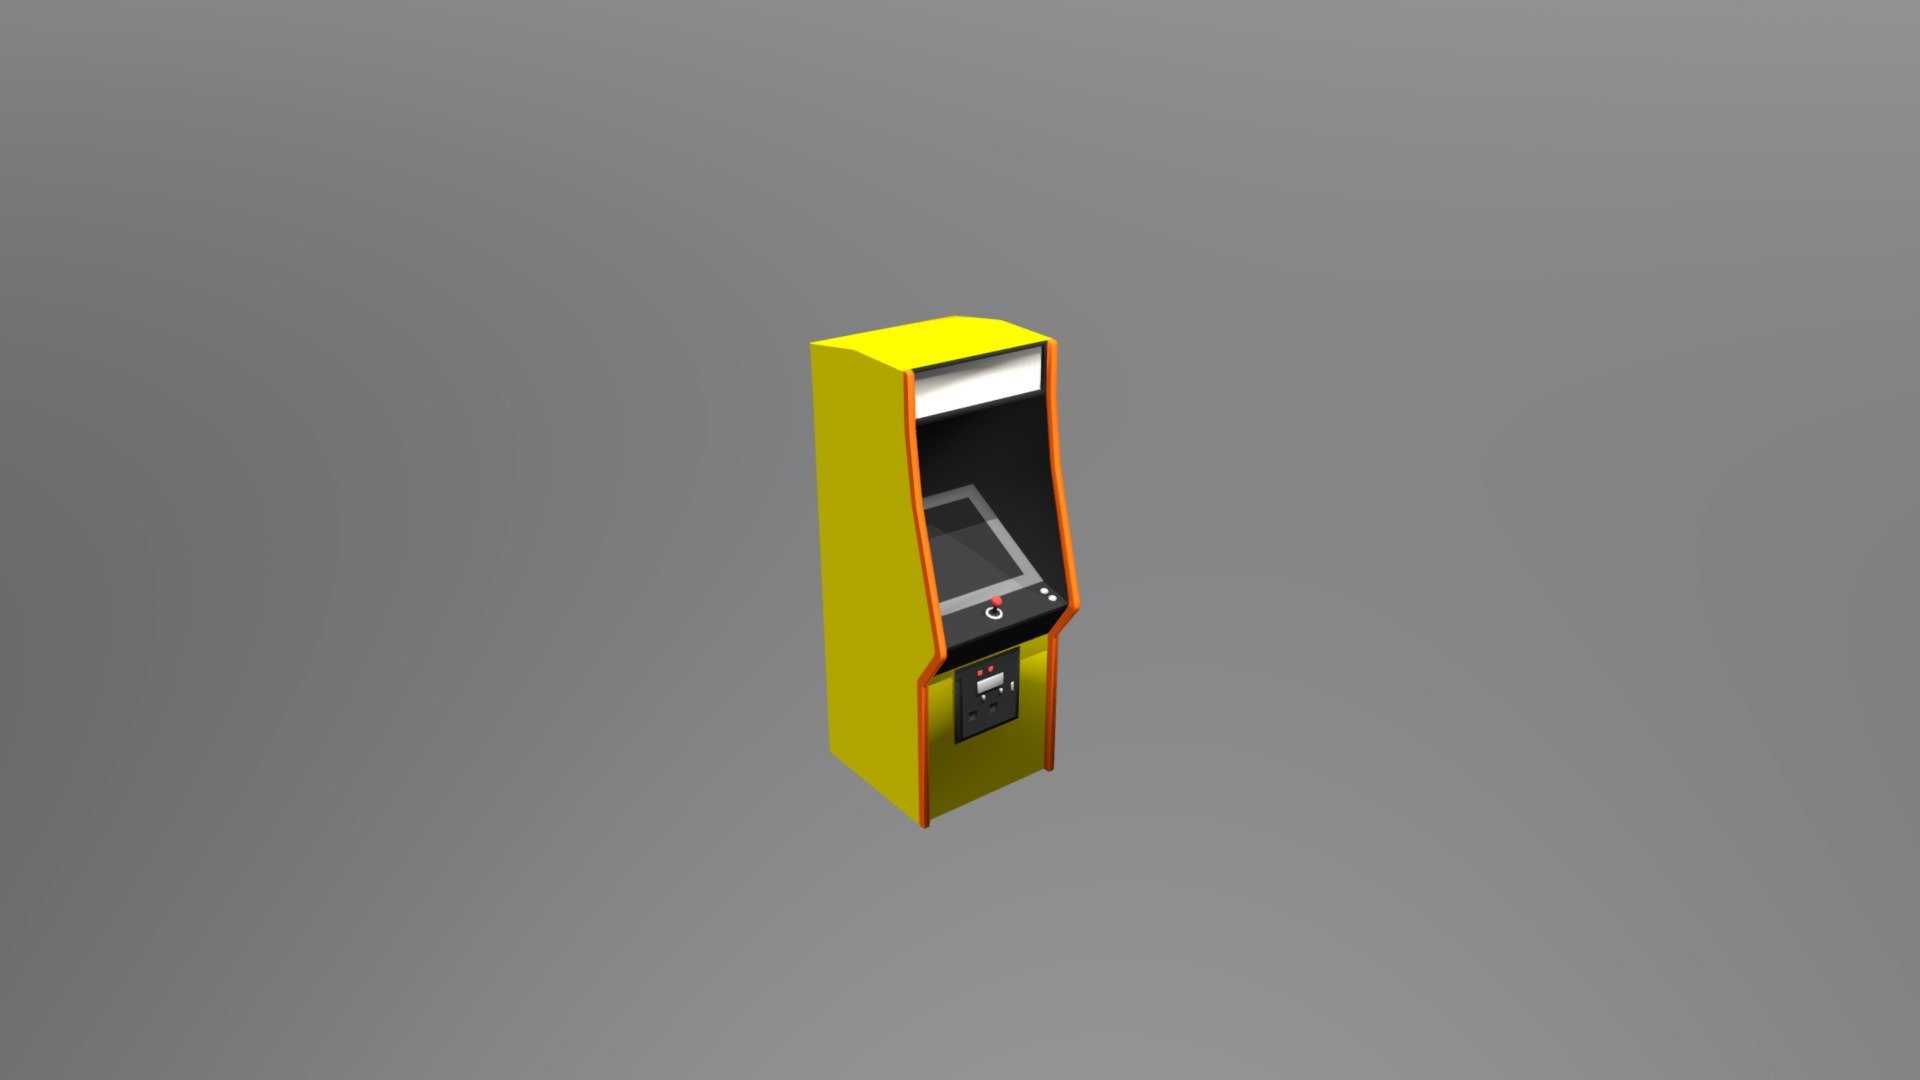 Just a low poly acrade machine 3d model